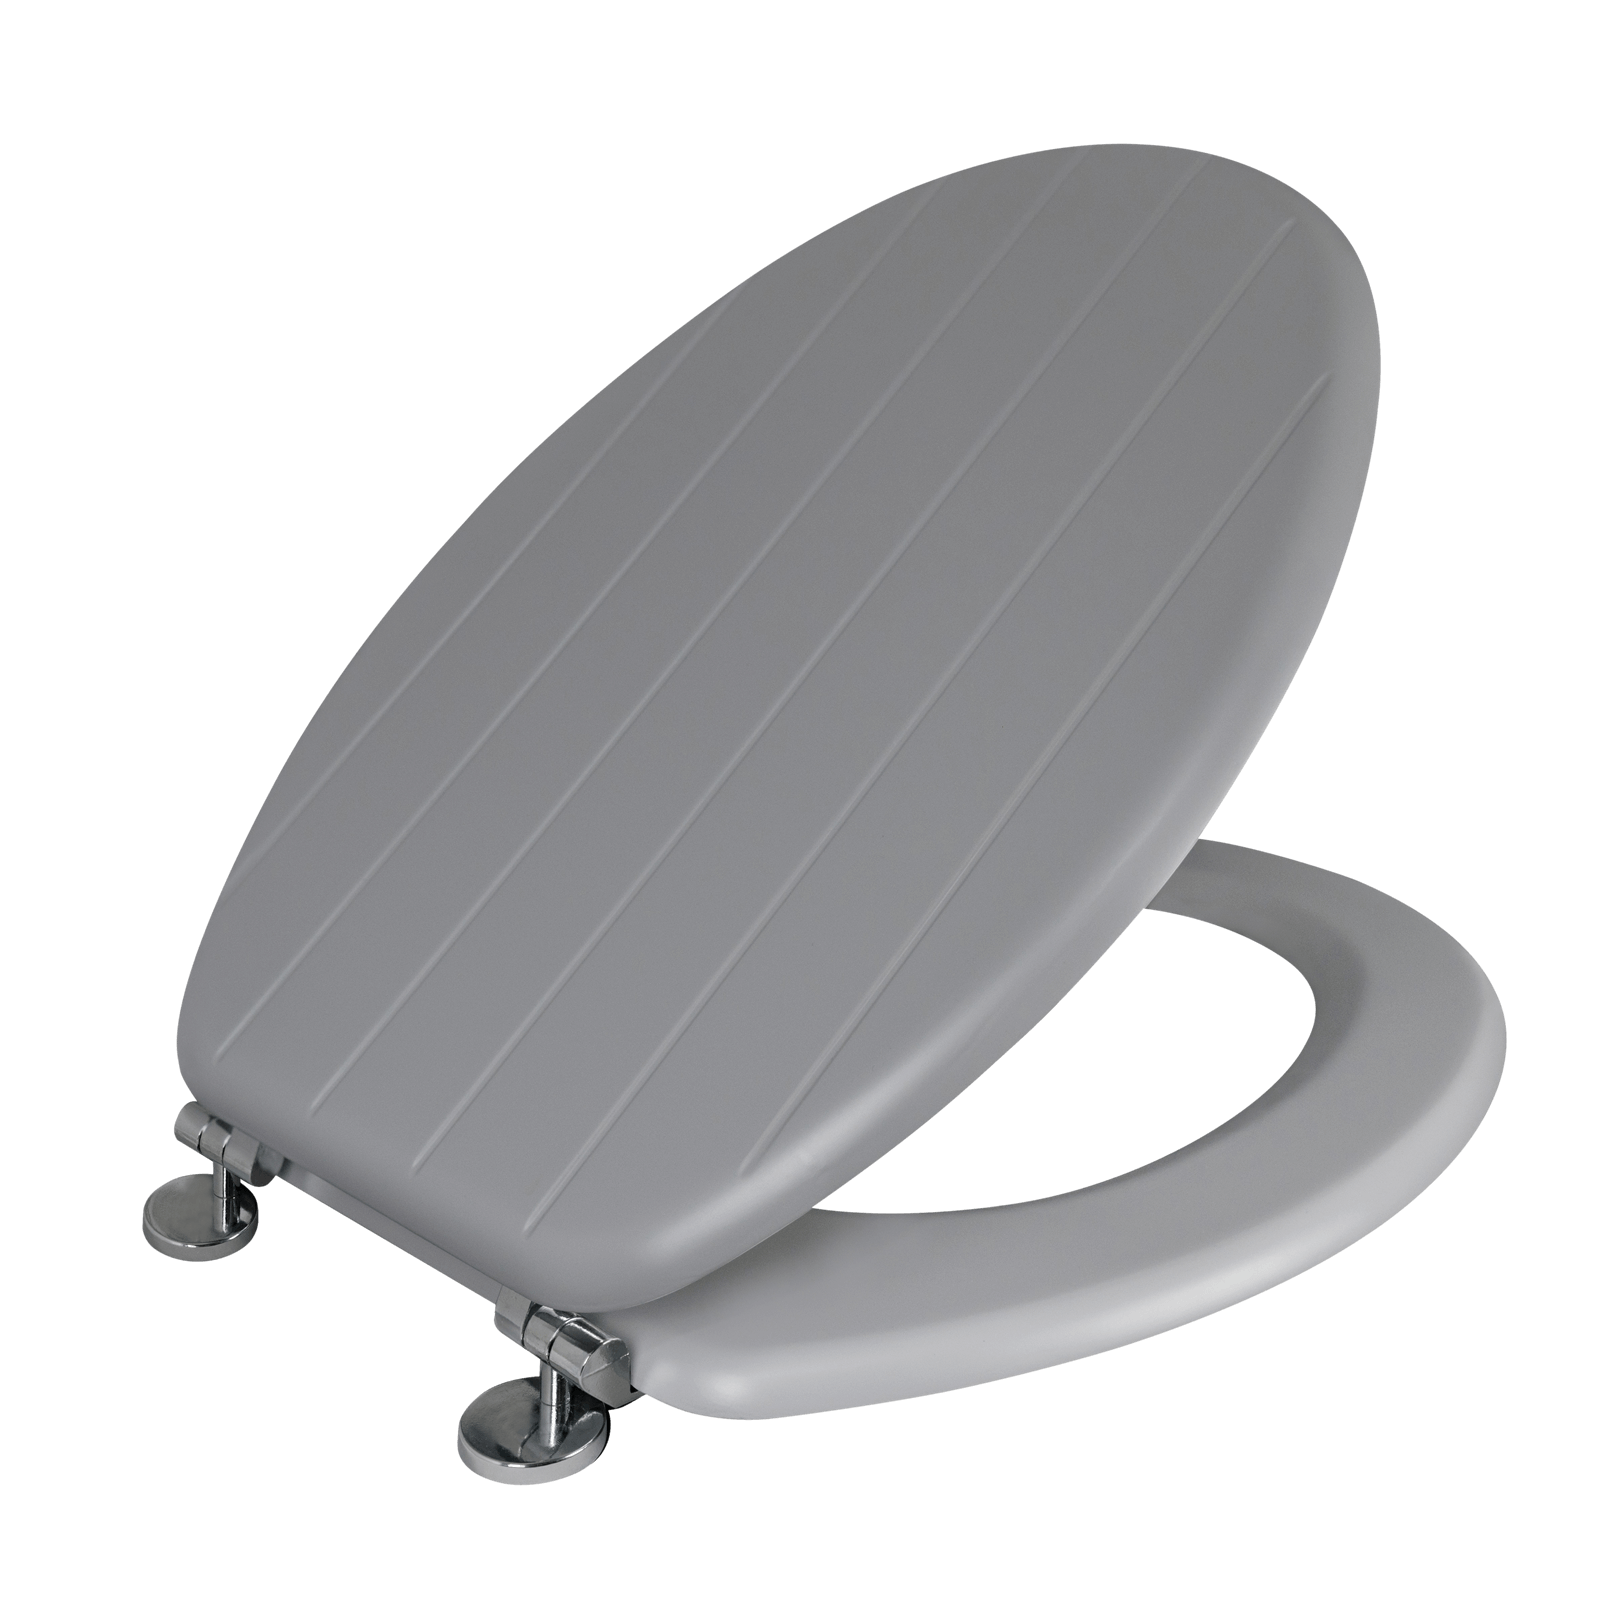 Allana Tongue & Groove Moulded Wood Toilet Seat - Grey